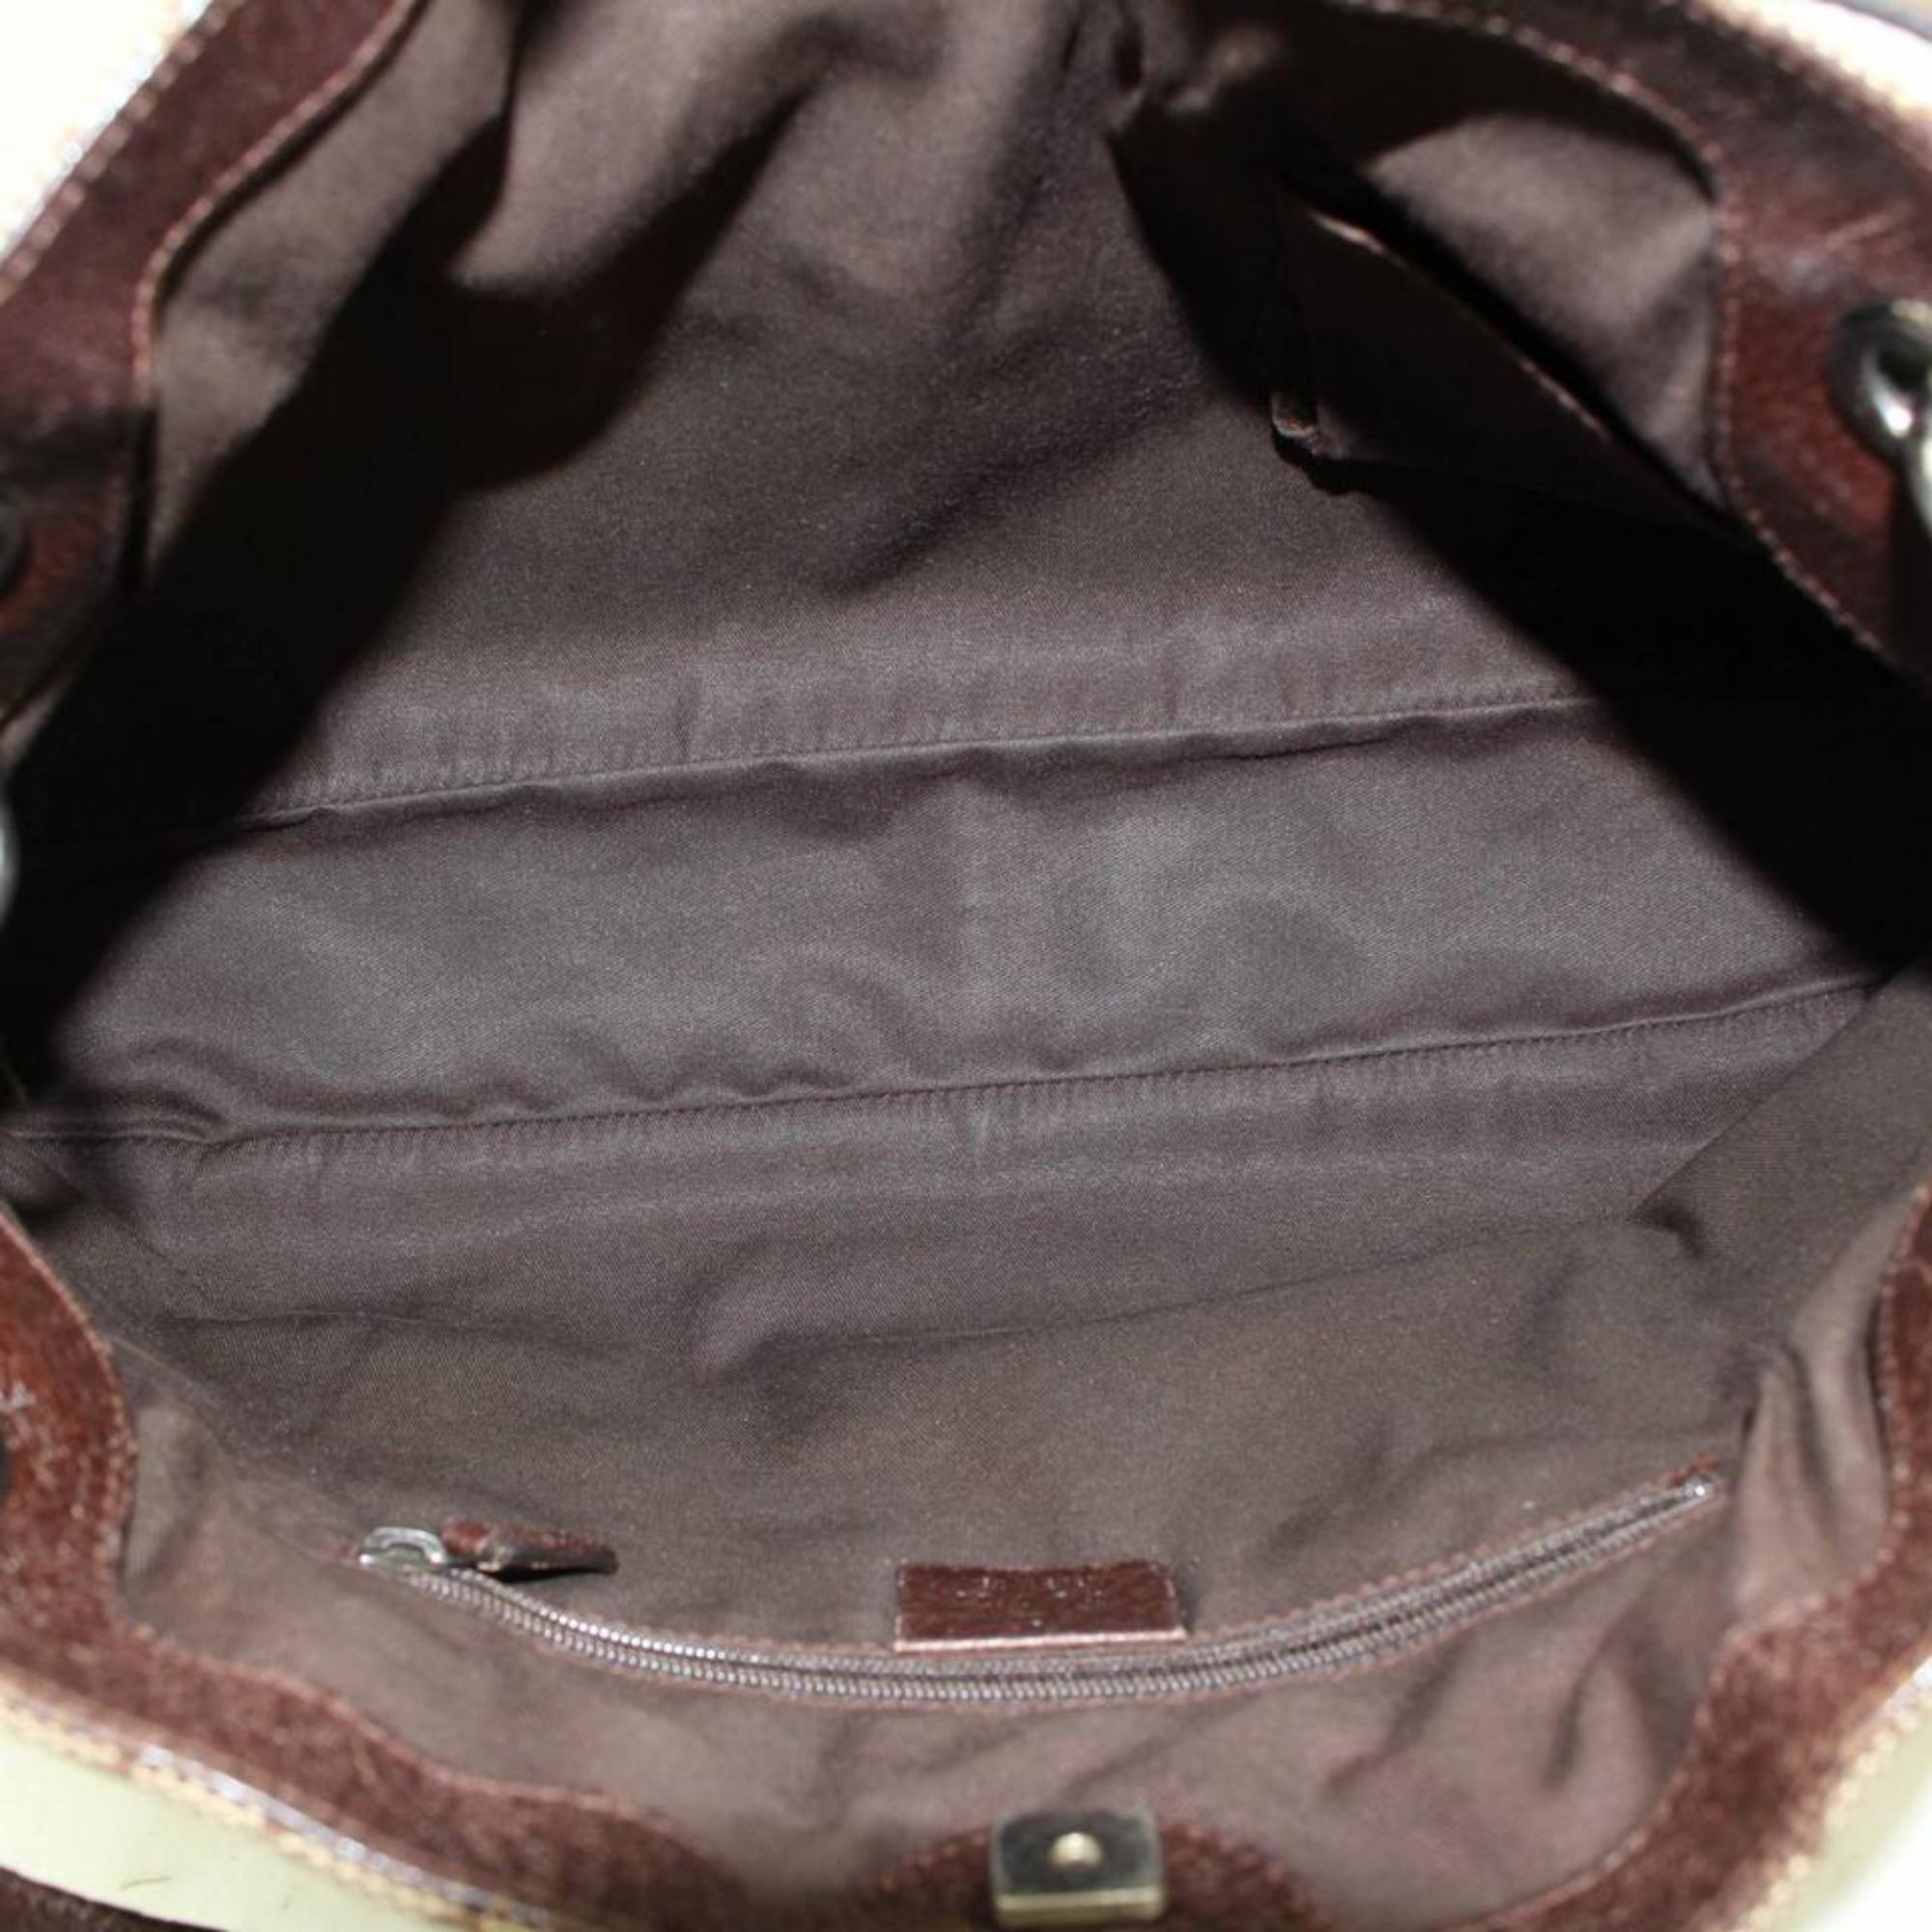 Gucci Eclipse Monogram 868460 Brown Canvas Shoulder Bag In Good Condition For Sale In Forest Hills, NY